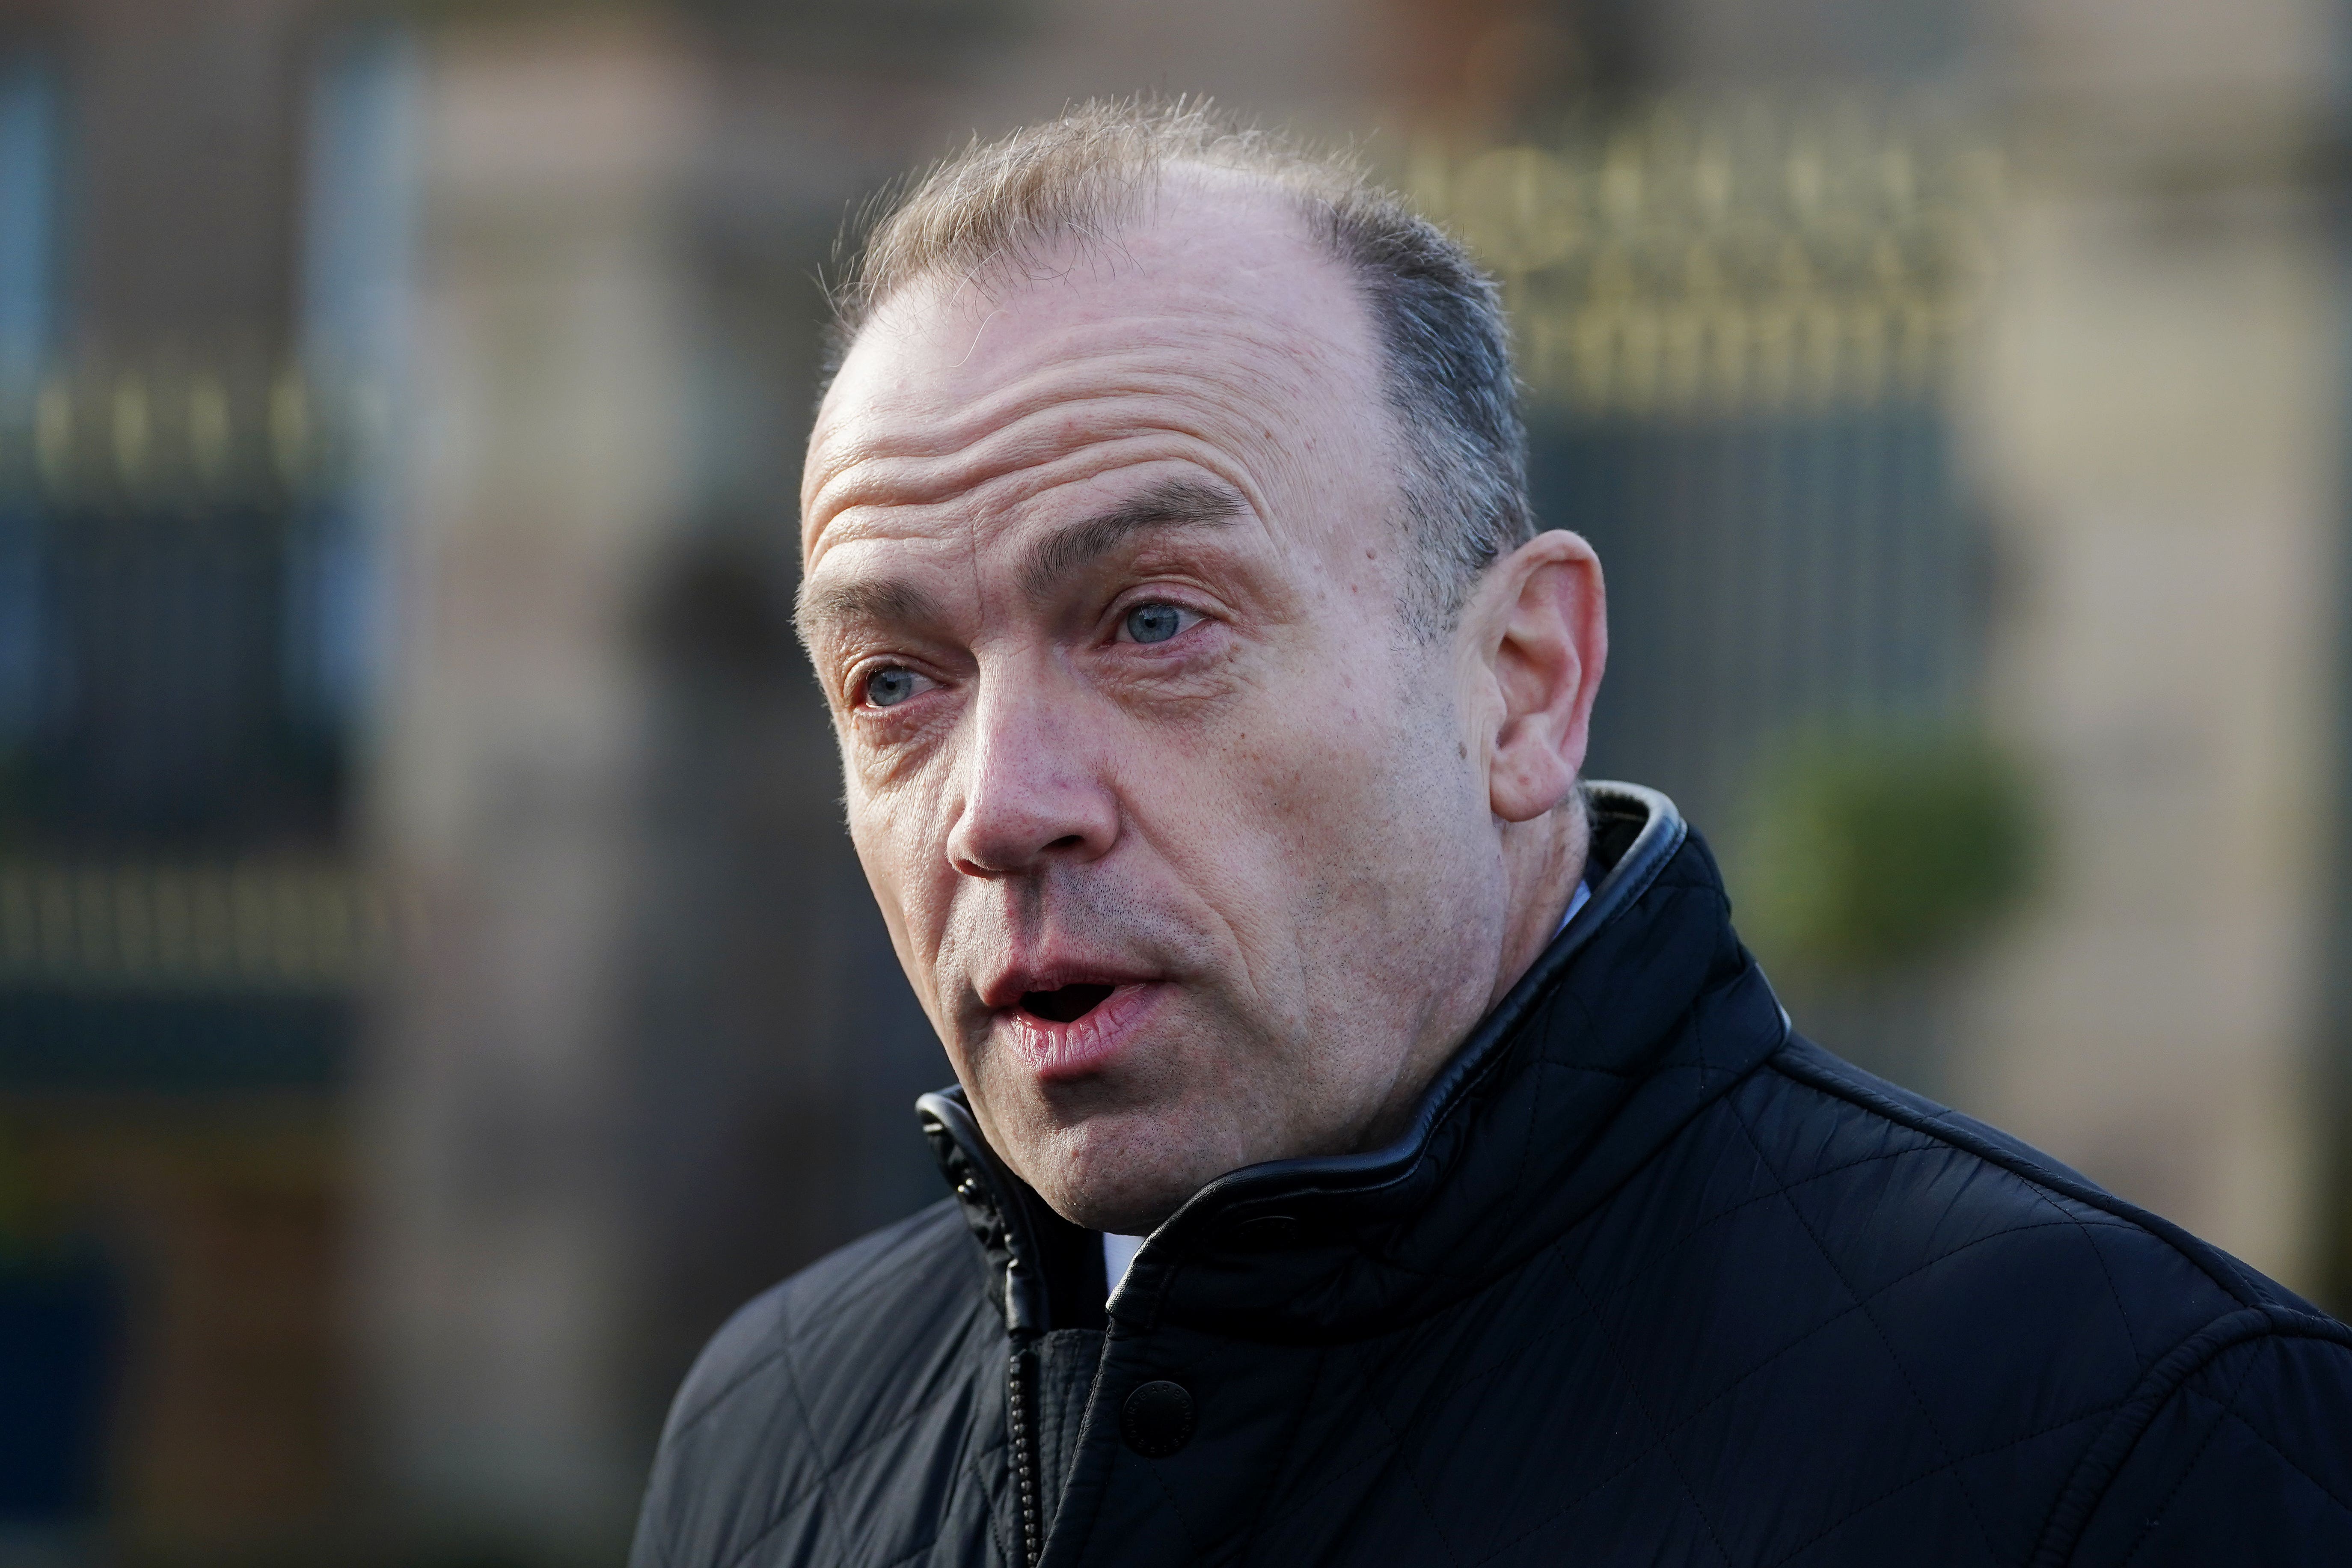 Northern Ireland Secretary Chris Heaton-Harris has revealed amendments have been introduced to controversial legacy legislation (Brian Lawless/PA)